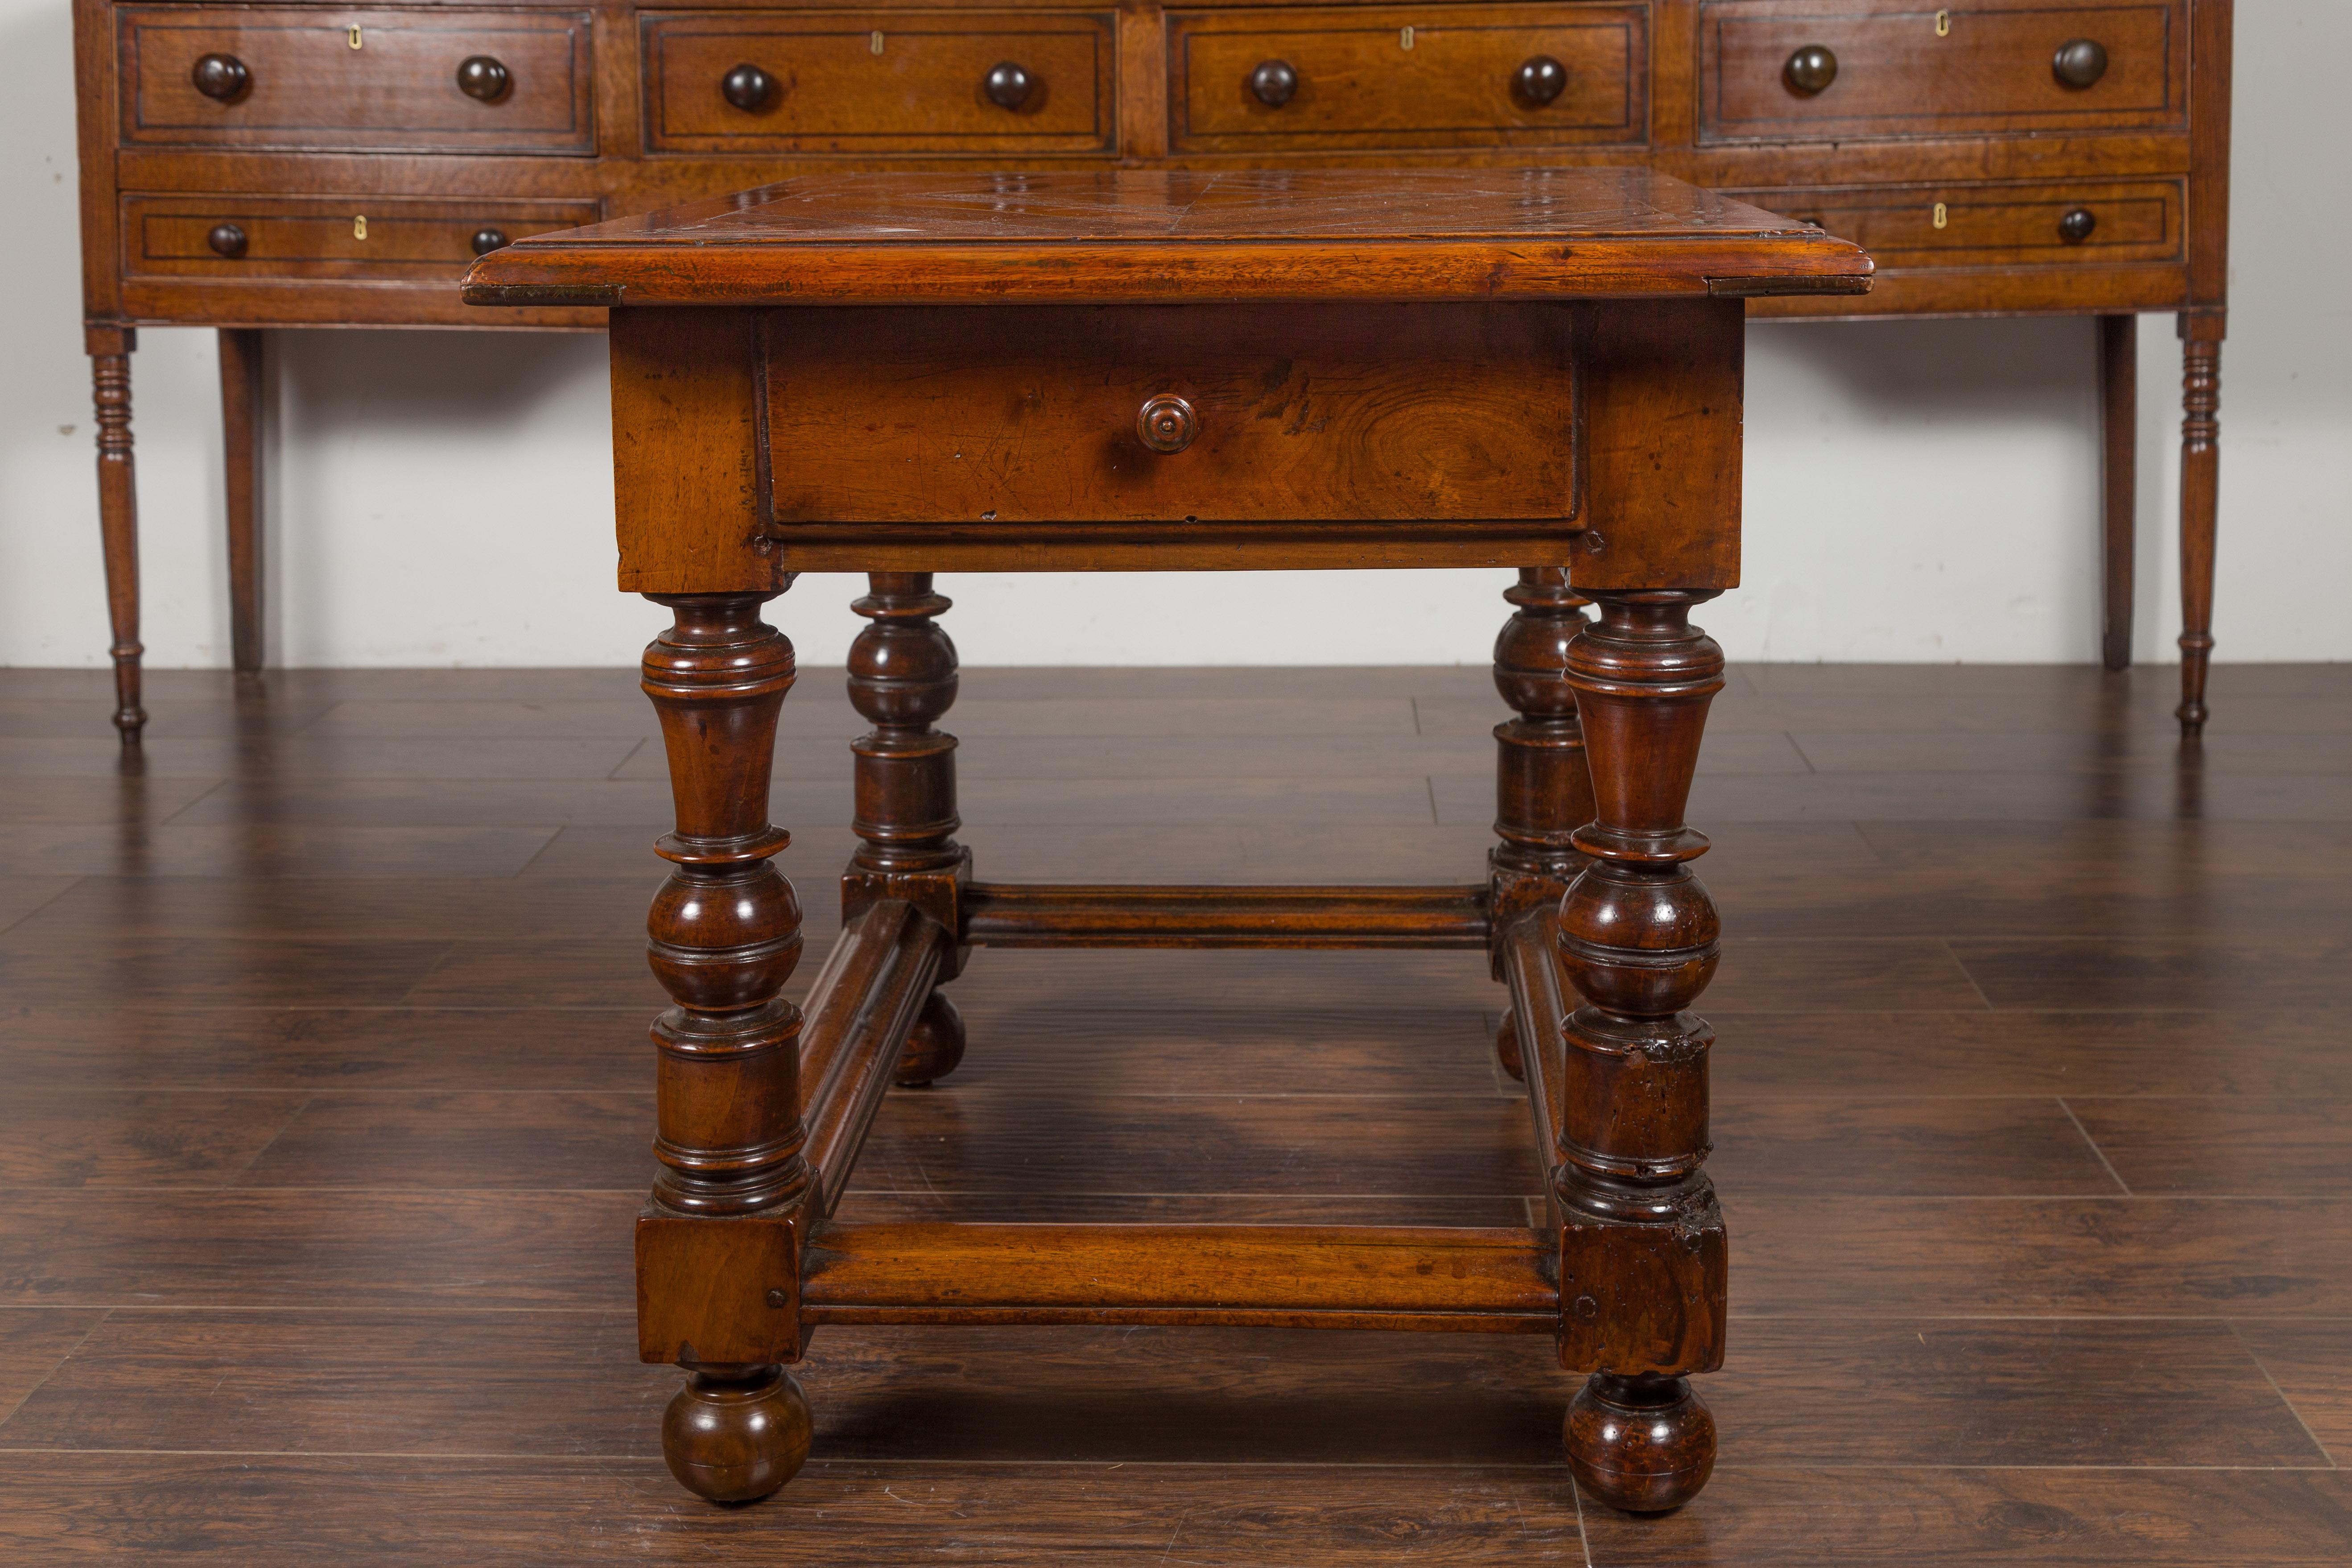 19th Century English 1850s Walnut Parquet Top Table with Single Drawer and Turned Legs For Sale